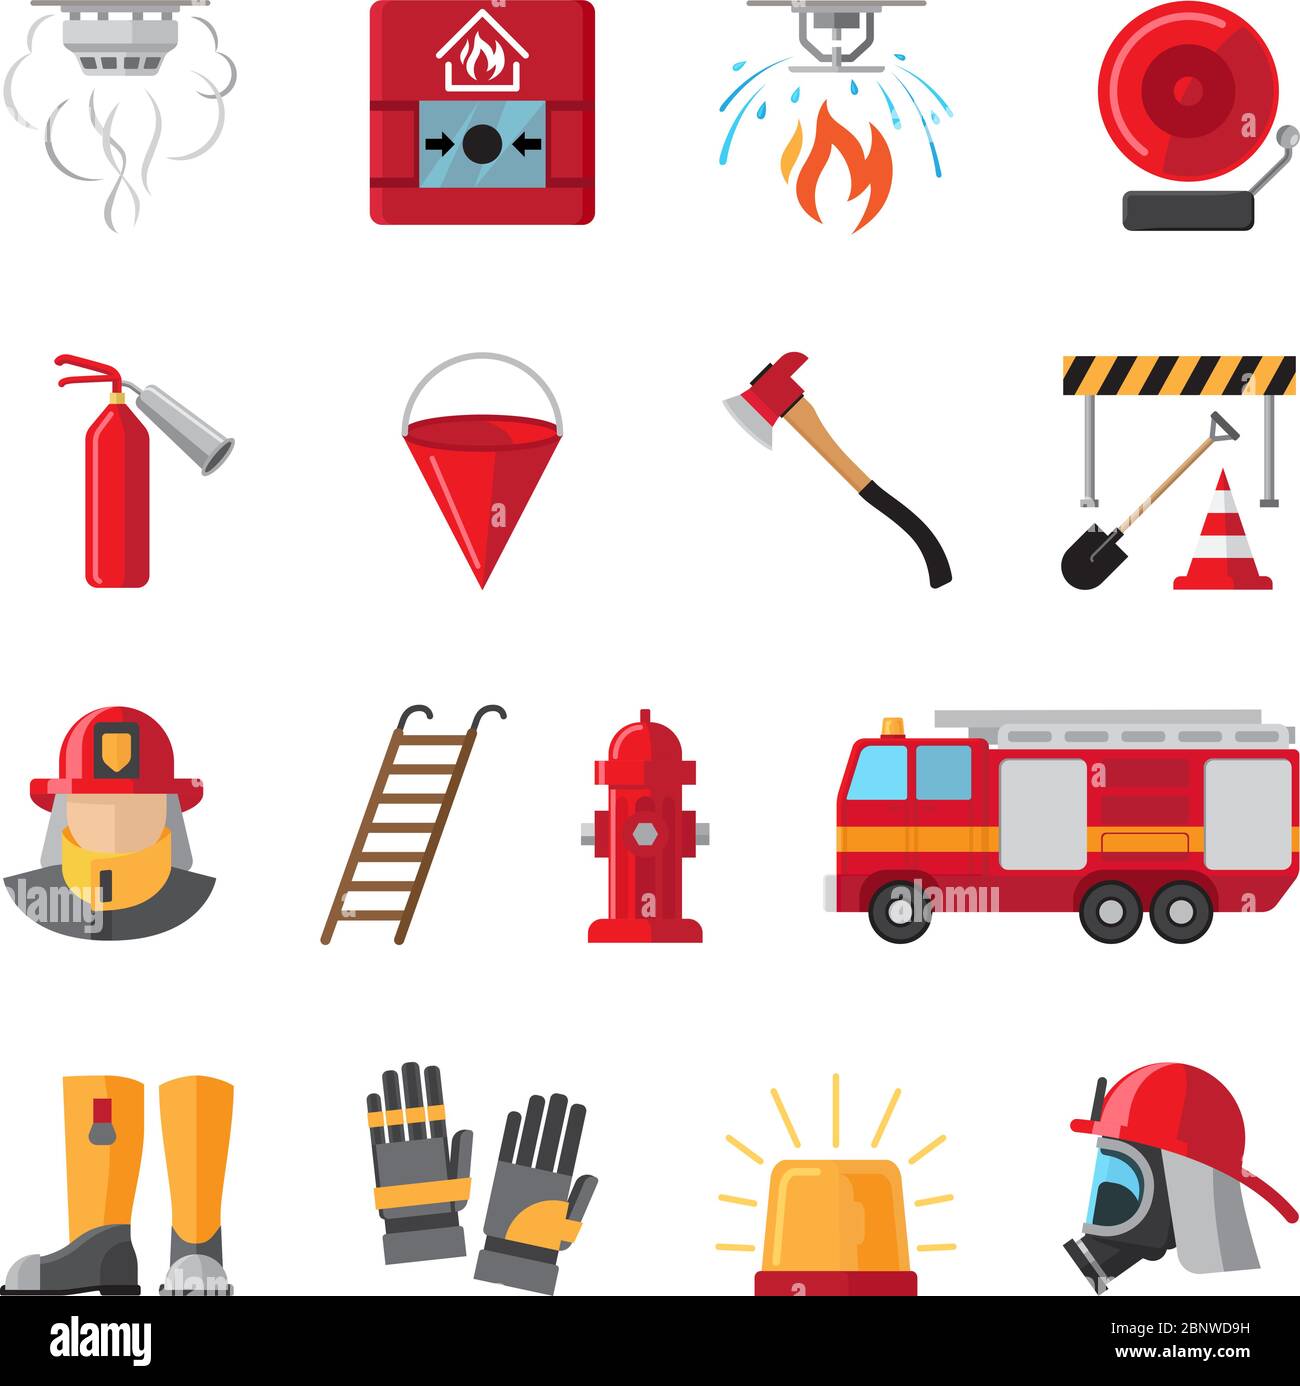 Fire Safety Day Classroom Activities - The Rocket Resource